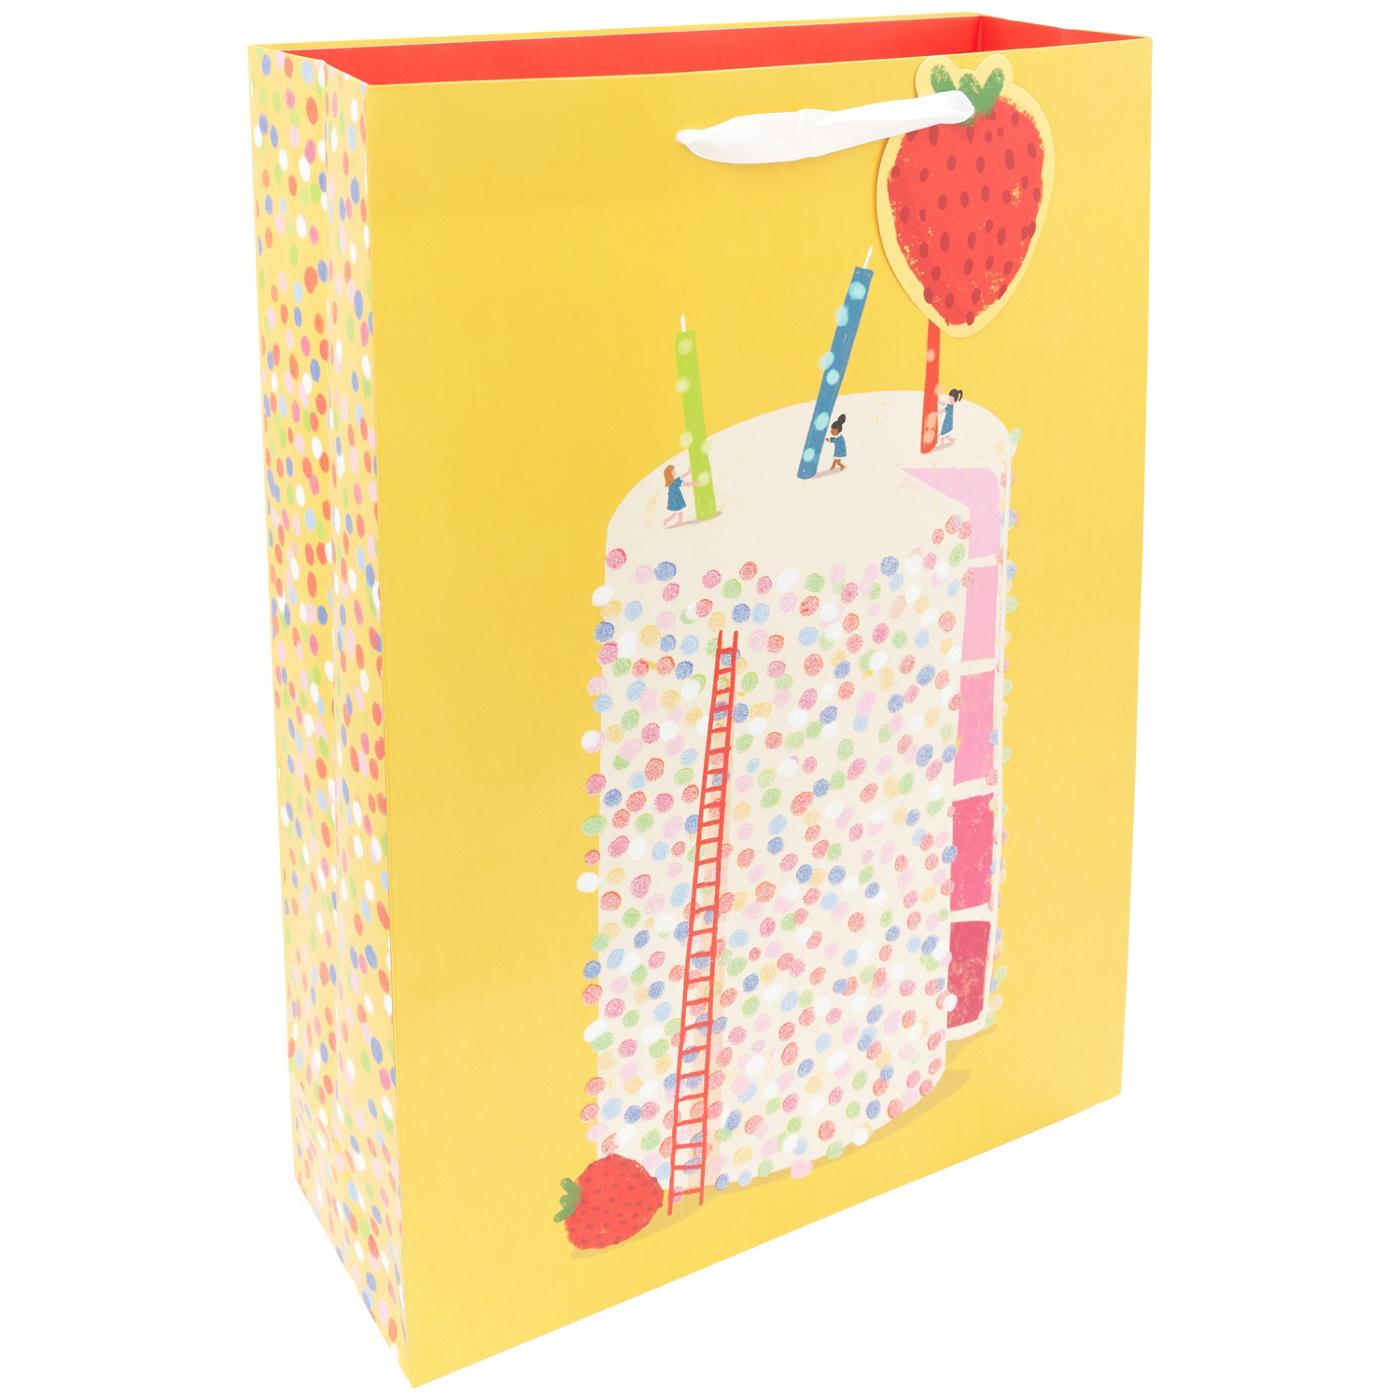 IG Design Tall Strawberry Cake Paper Gift Bag; image 2 of 2